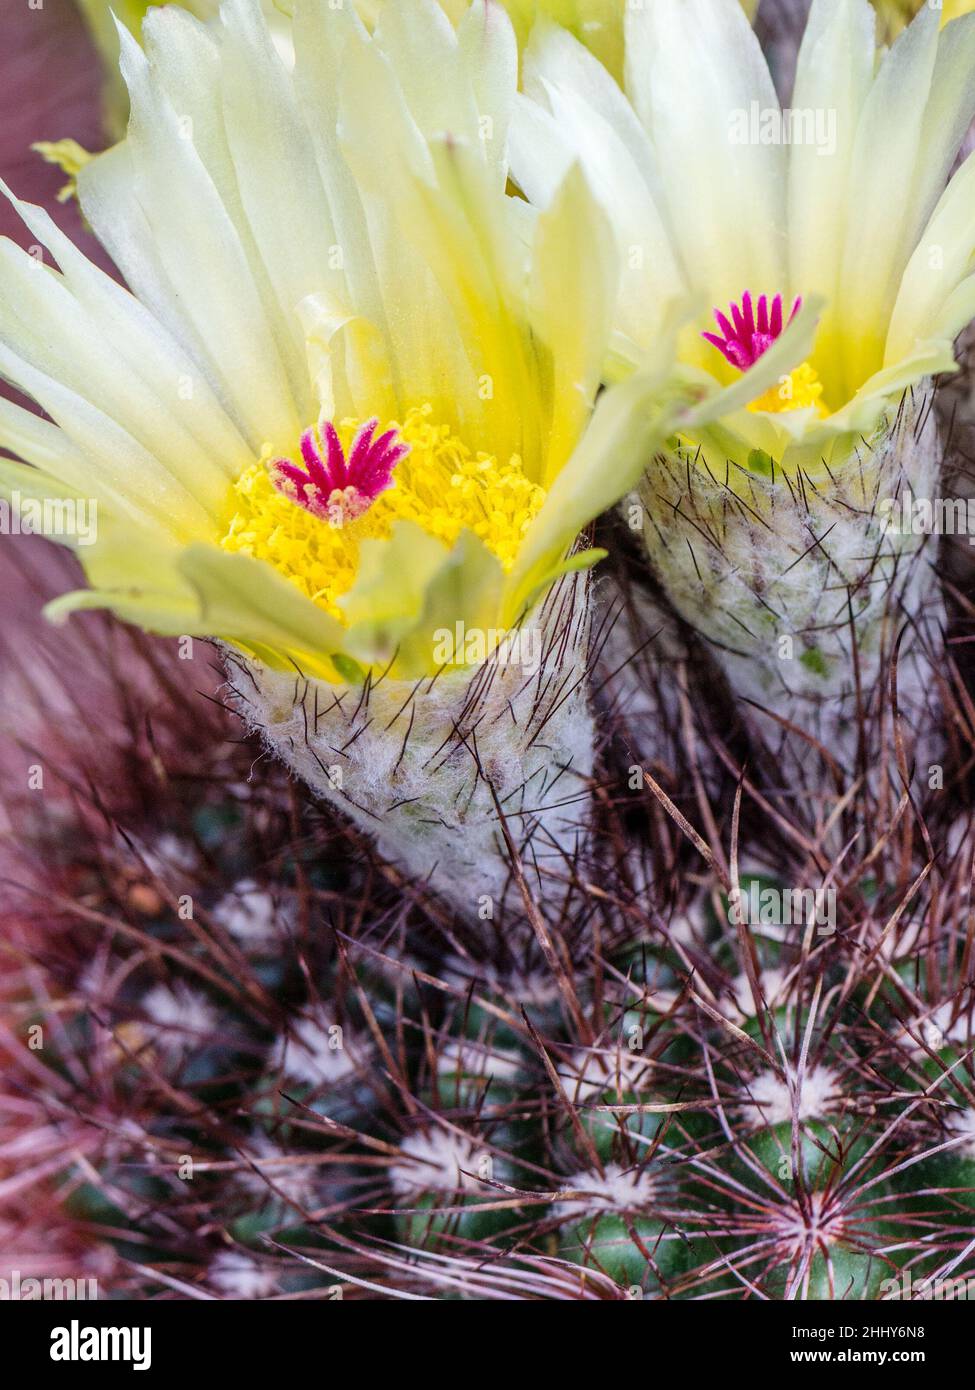 Blooming prickly cactus in close-up view. Stock Photo